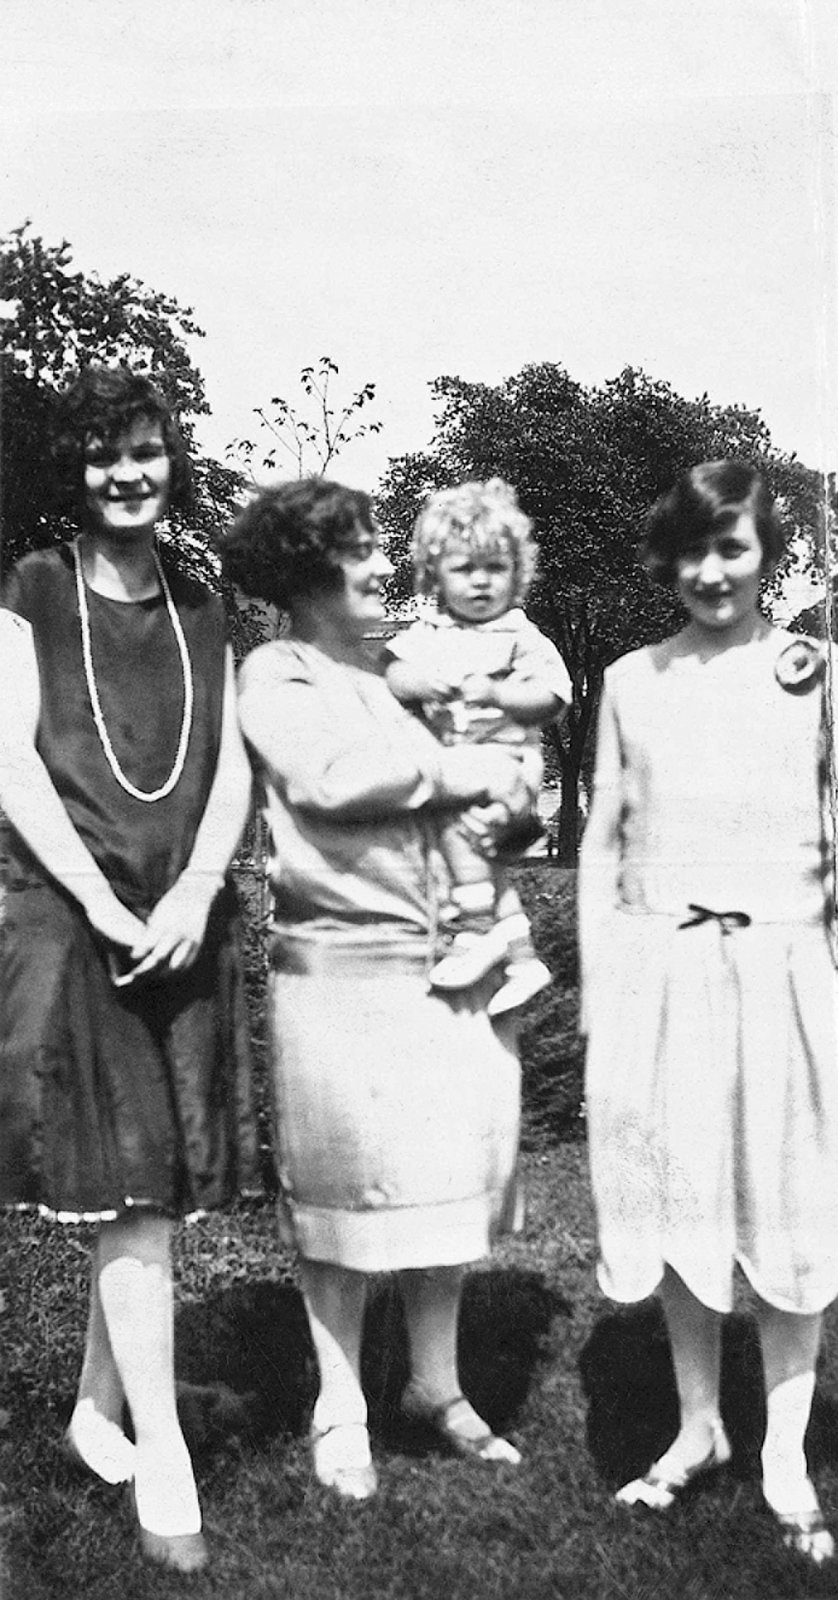 Left to right: Rachel McConnell, Margaret ‘Sissy’ (McConnell) Clarke with her son William, known as ‘Billy’, and Martha (McConnell ) Quinn.